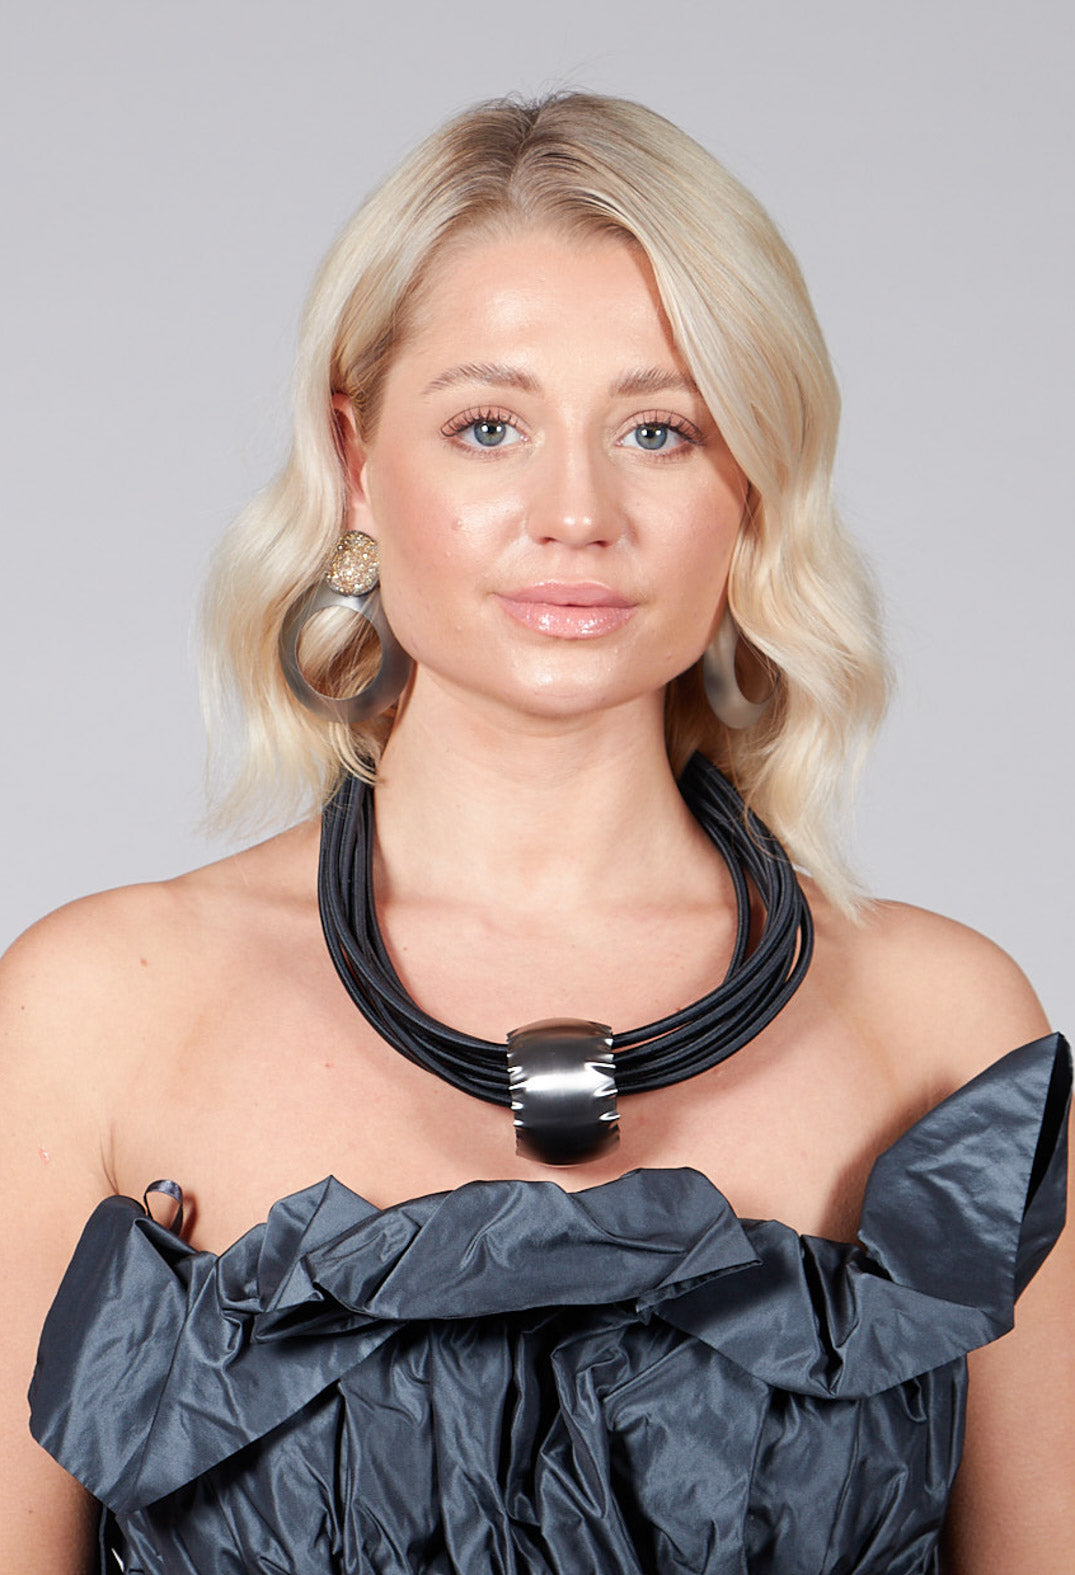 Multistrand Necklace in Black With Silver Metal Pendant